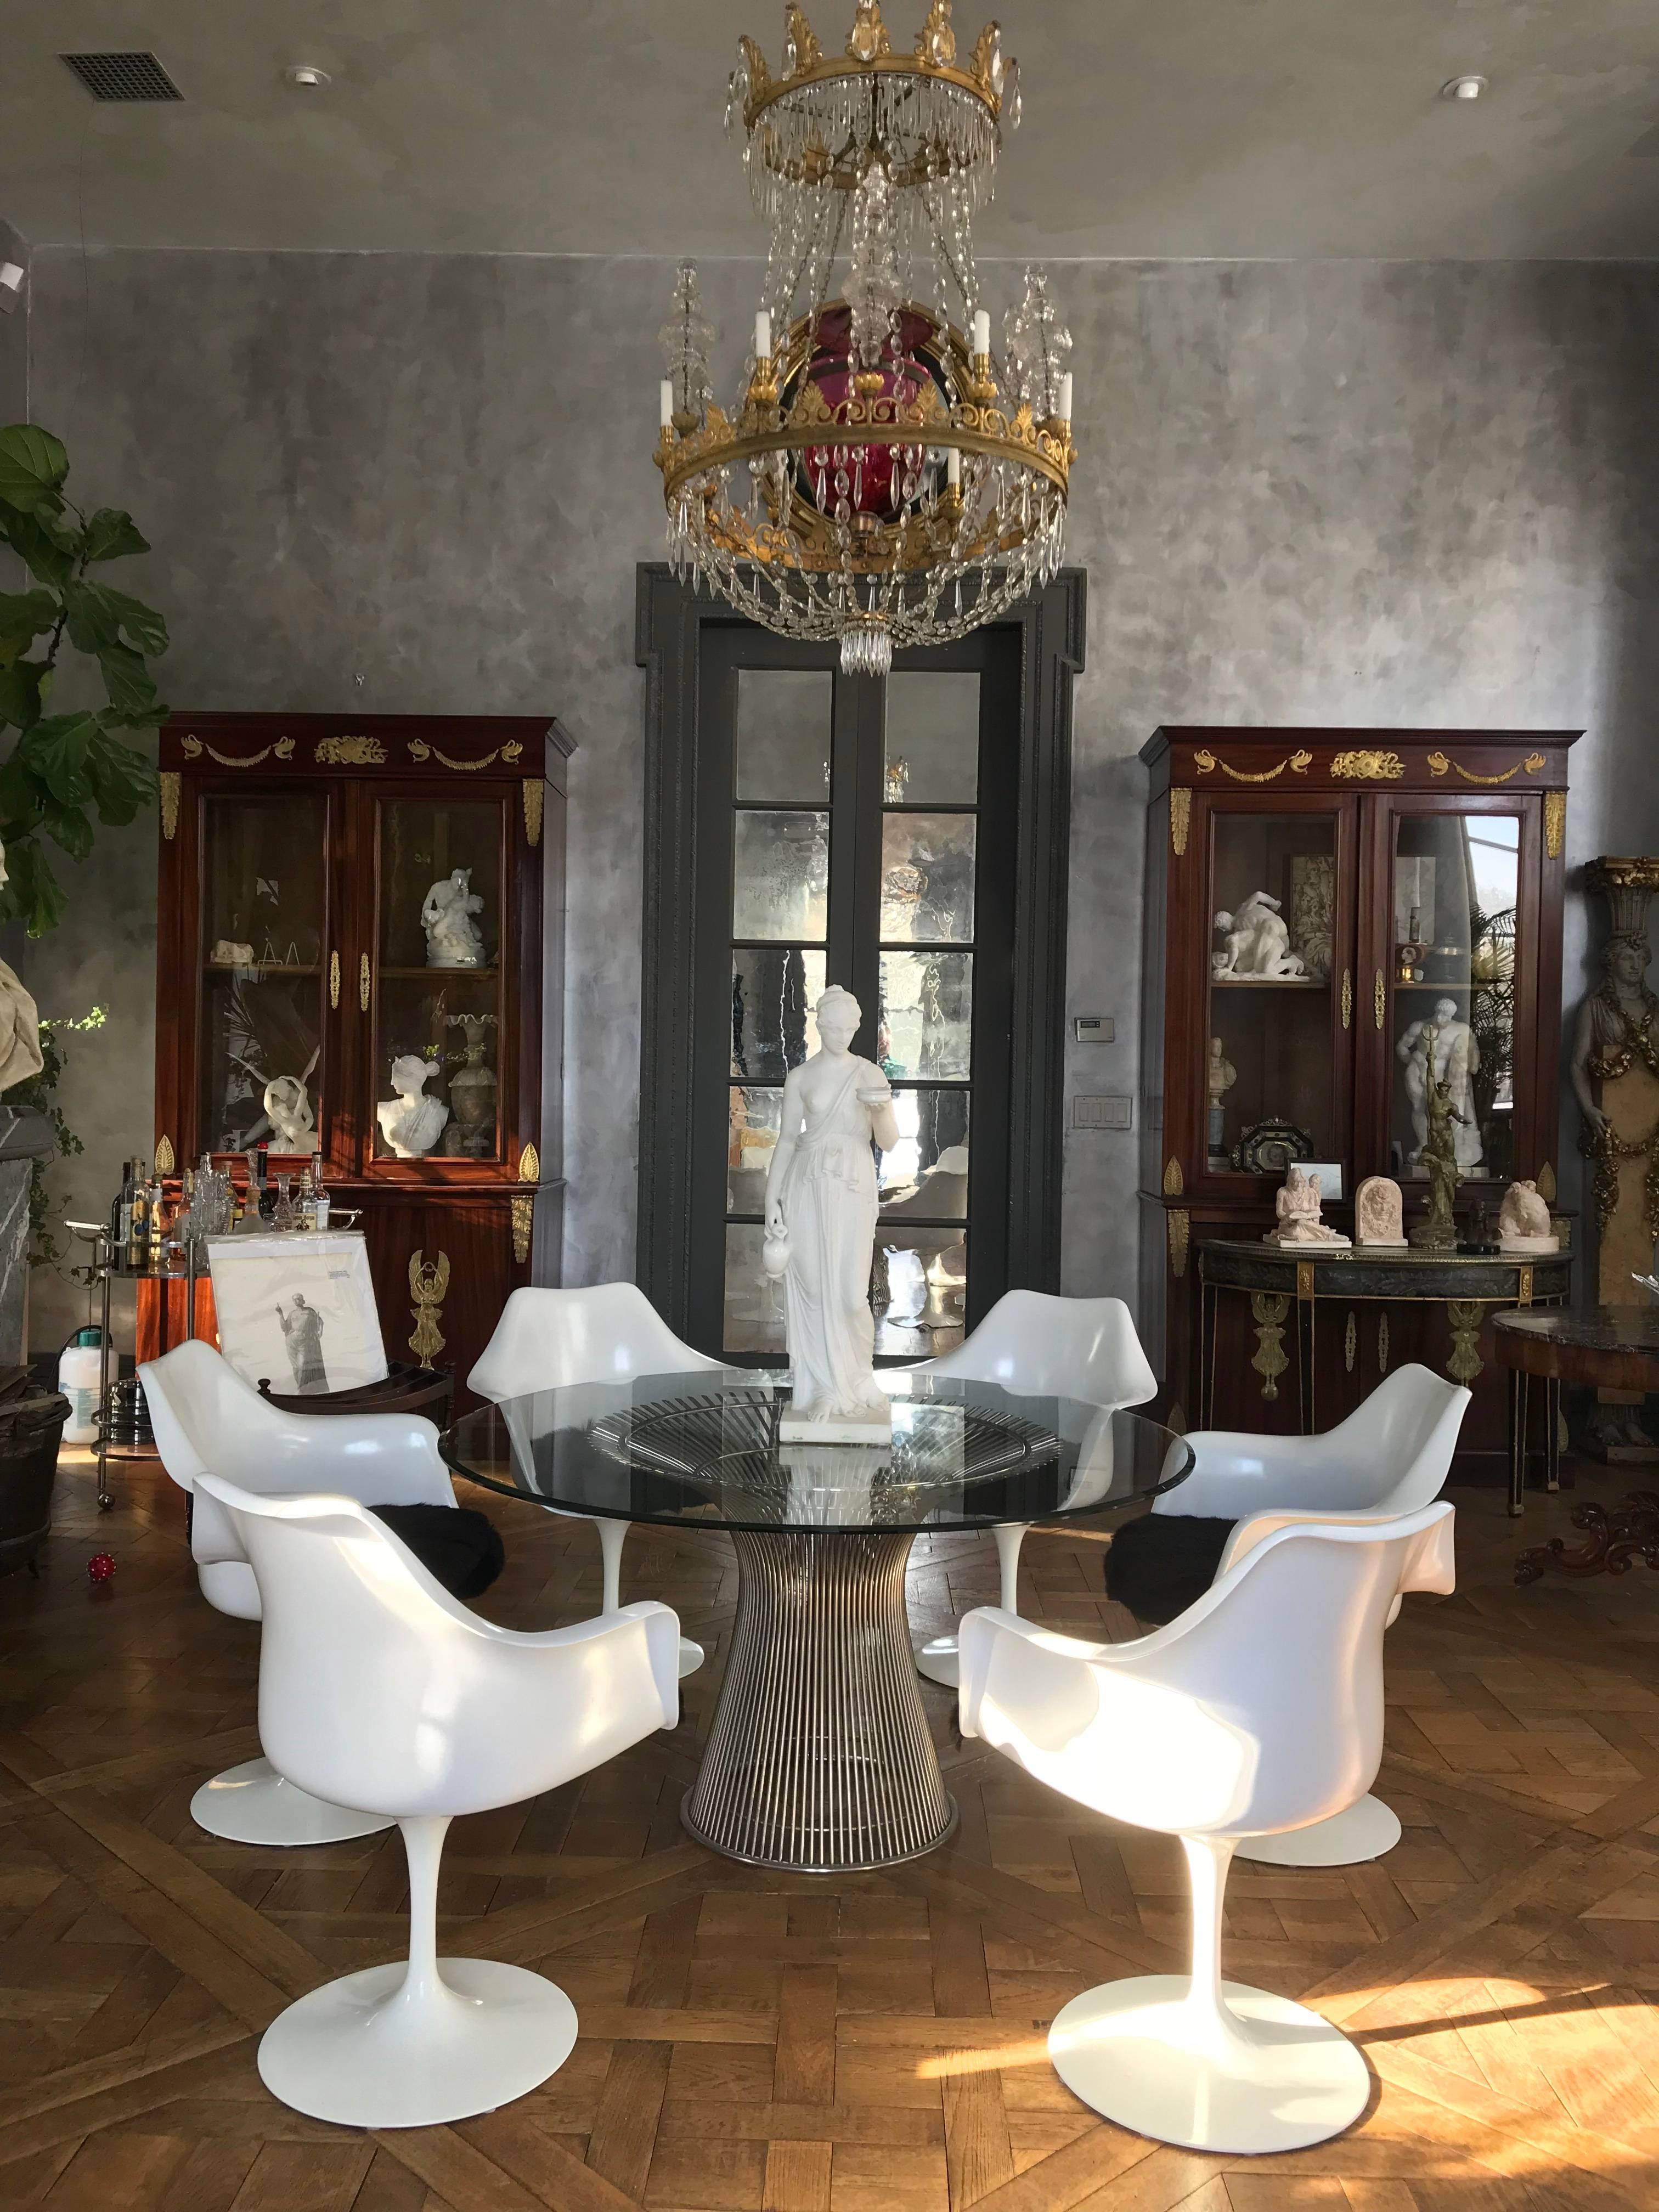 This elegant dining table was designed by Warren Platner for Knoll. 
It has a chrome cage design base and a bevelled glass top that can be replaced to accommodate a larger size top.